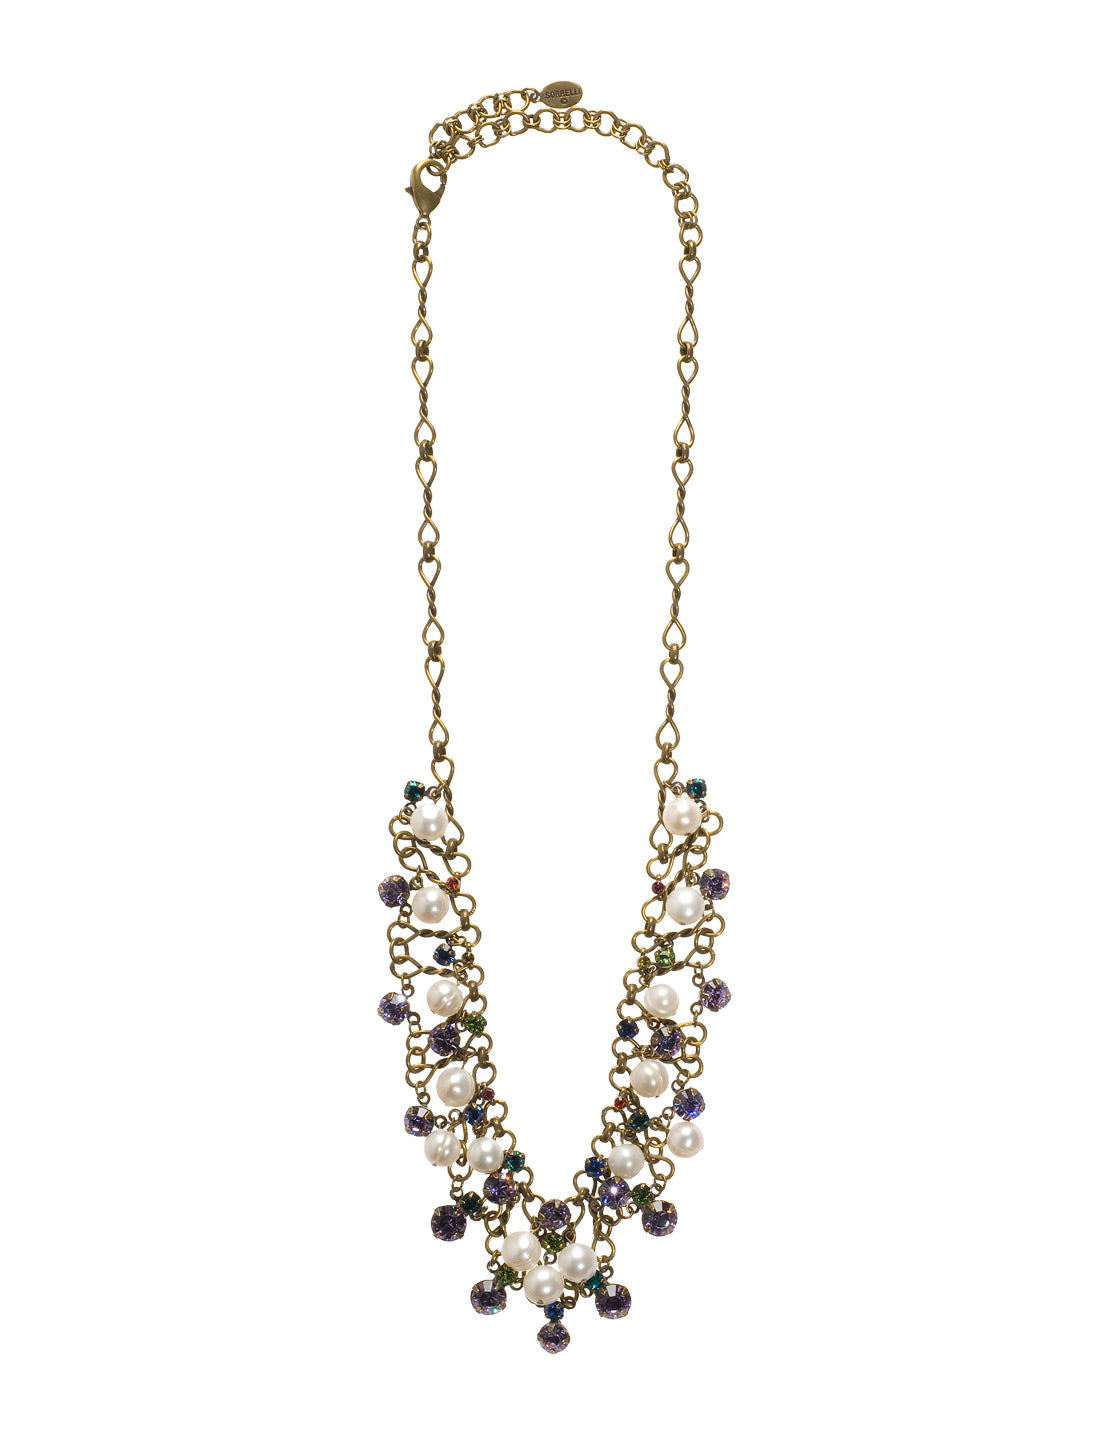 Clustered Crystal and Bead Tennis Necklace - NCF5AGHAR - A cluster of pearls and round crystals on a decorative chain creates this classically breathtaking design. From Sorrelli's Harmony collection in our Antique Gold-tone finish.